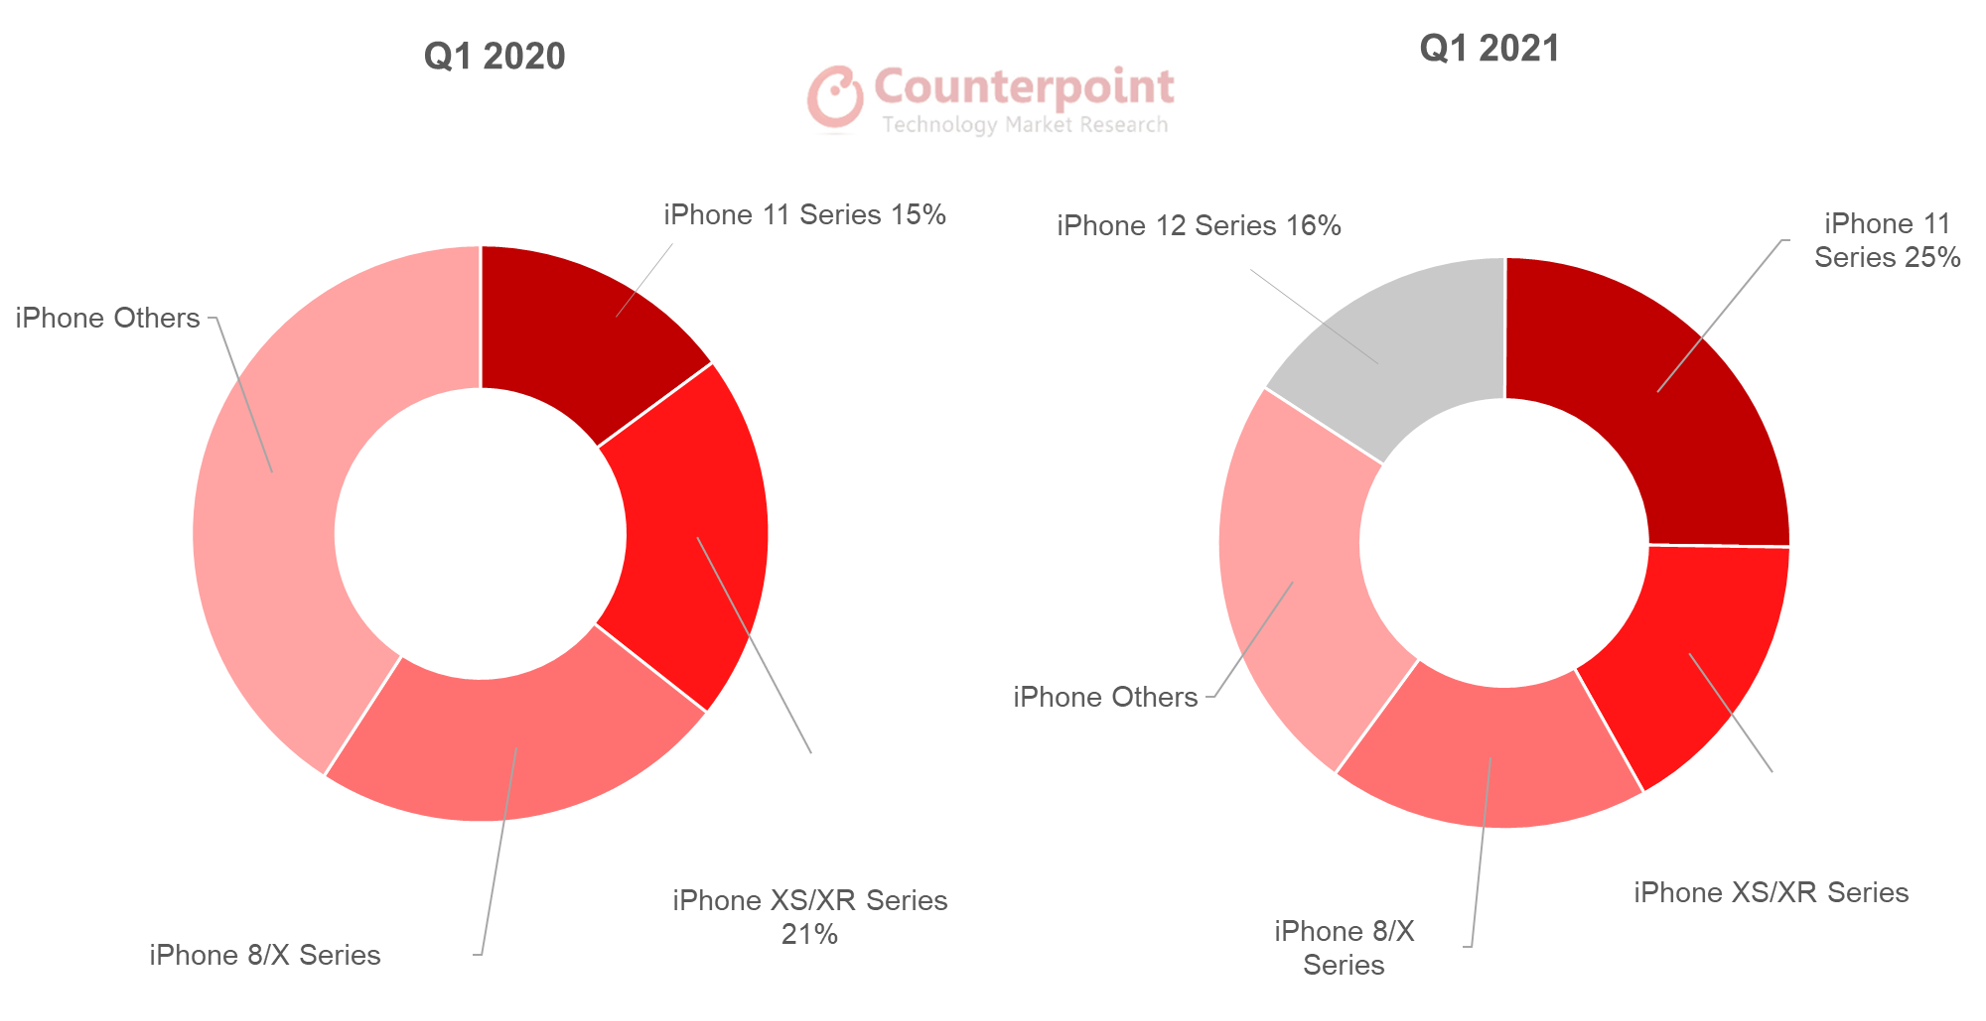 Counterpoint Research iPhone Series Installed Base Share in Q1 2020 and Q1 2021